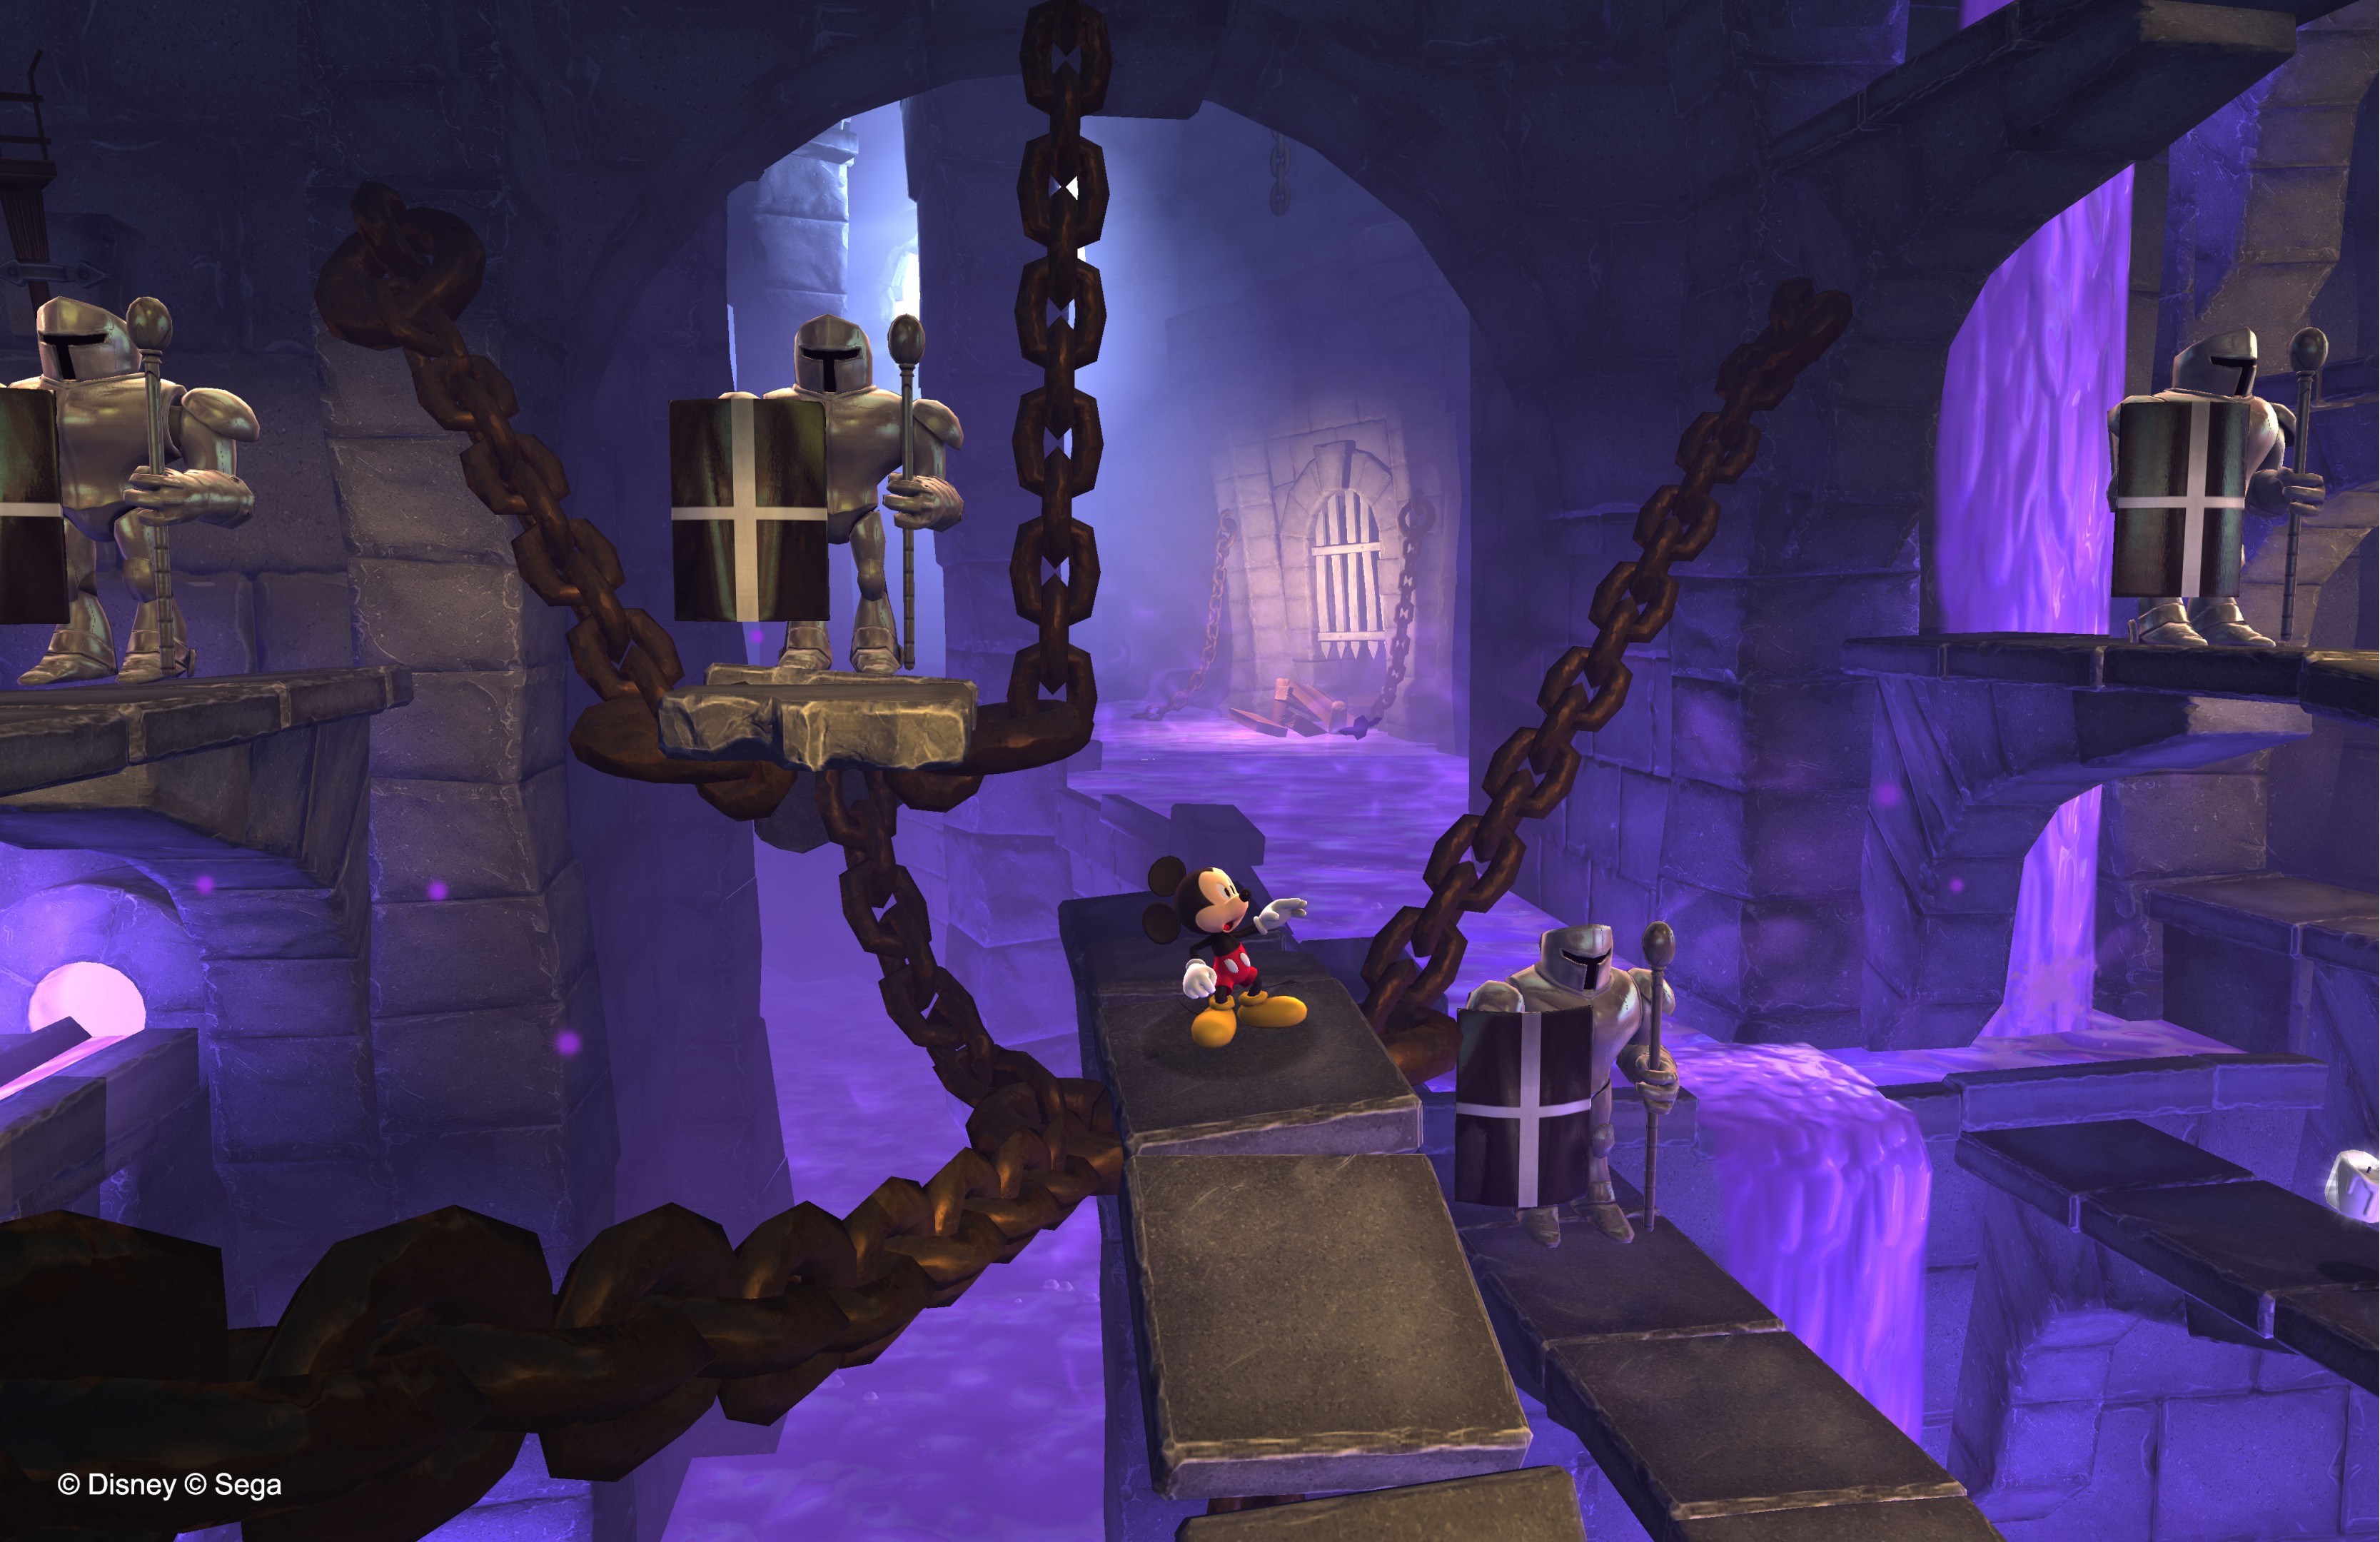 castle of illusion starring mickey mouse boss